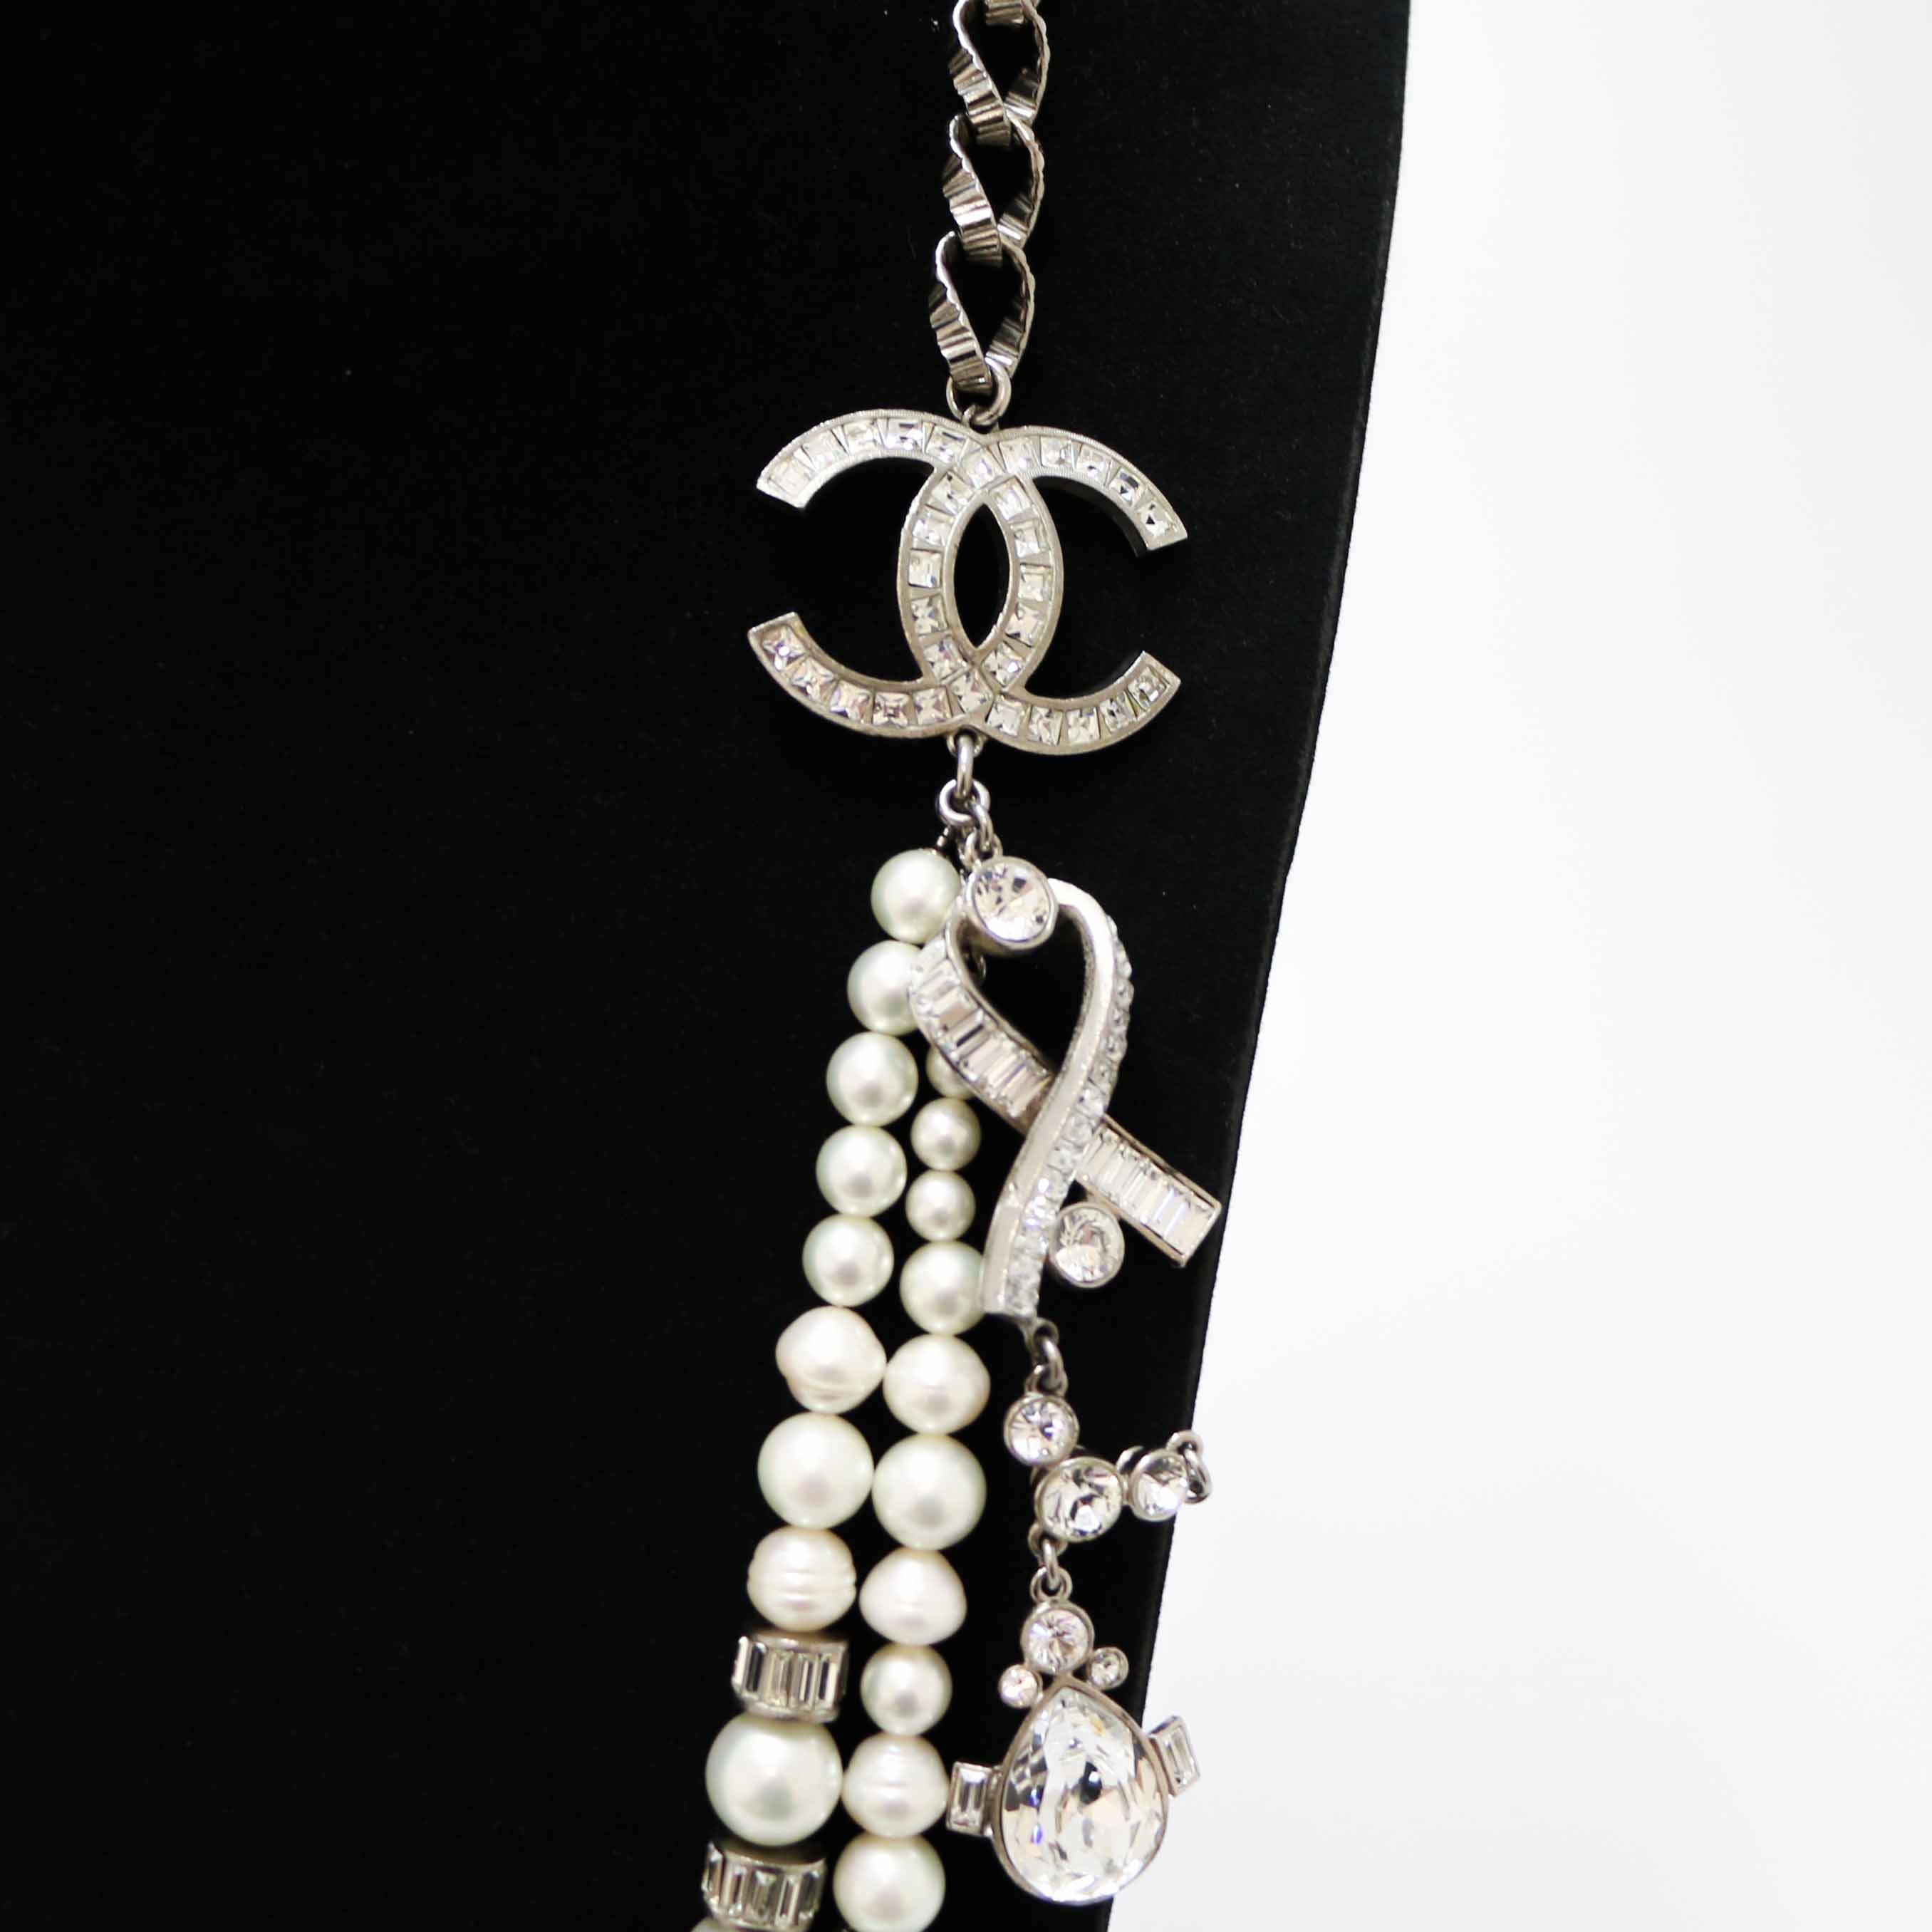 Wonderful couture CHANEL necklace crystals and  pearls

Condition: very good
Materials: pearls, metal, crystal, cultured pearl
Color: white, silver
Dimensions: 47cm, total length: 94cm
Stamp: no
Details: big CC in metal and crystal, striated